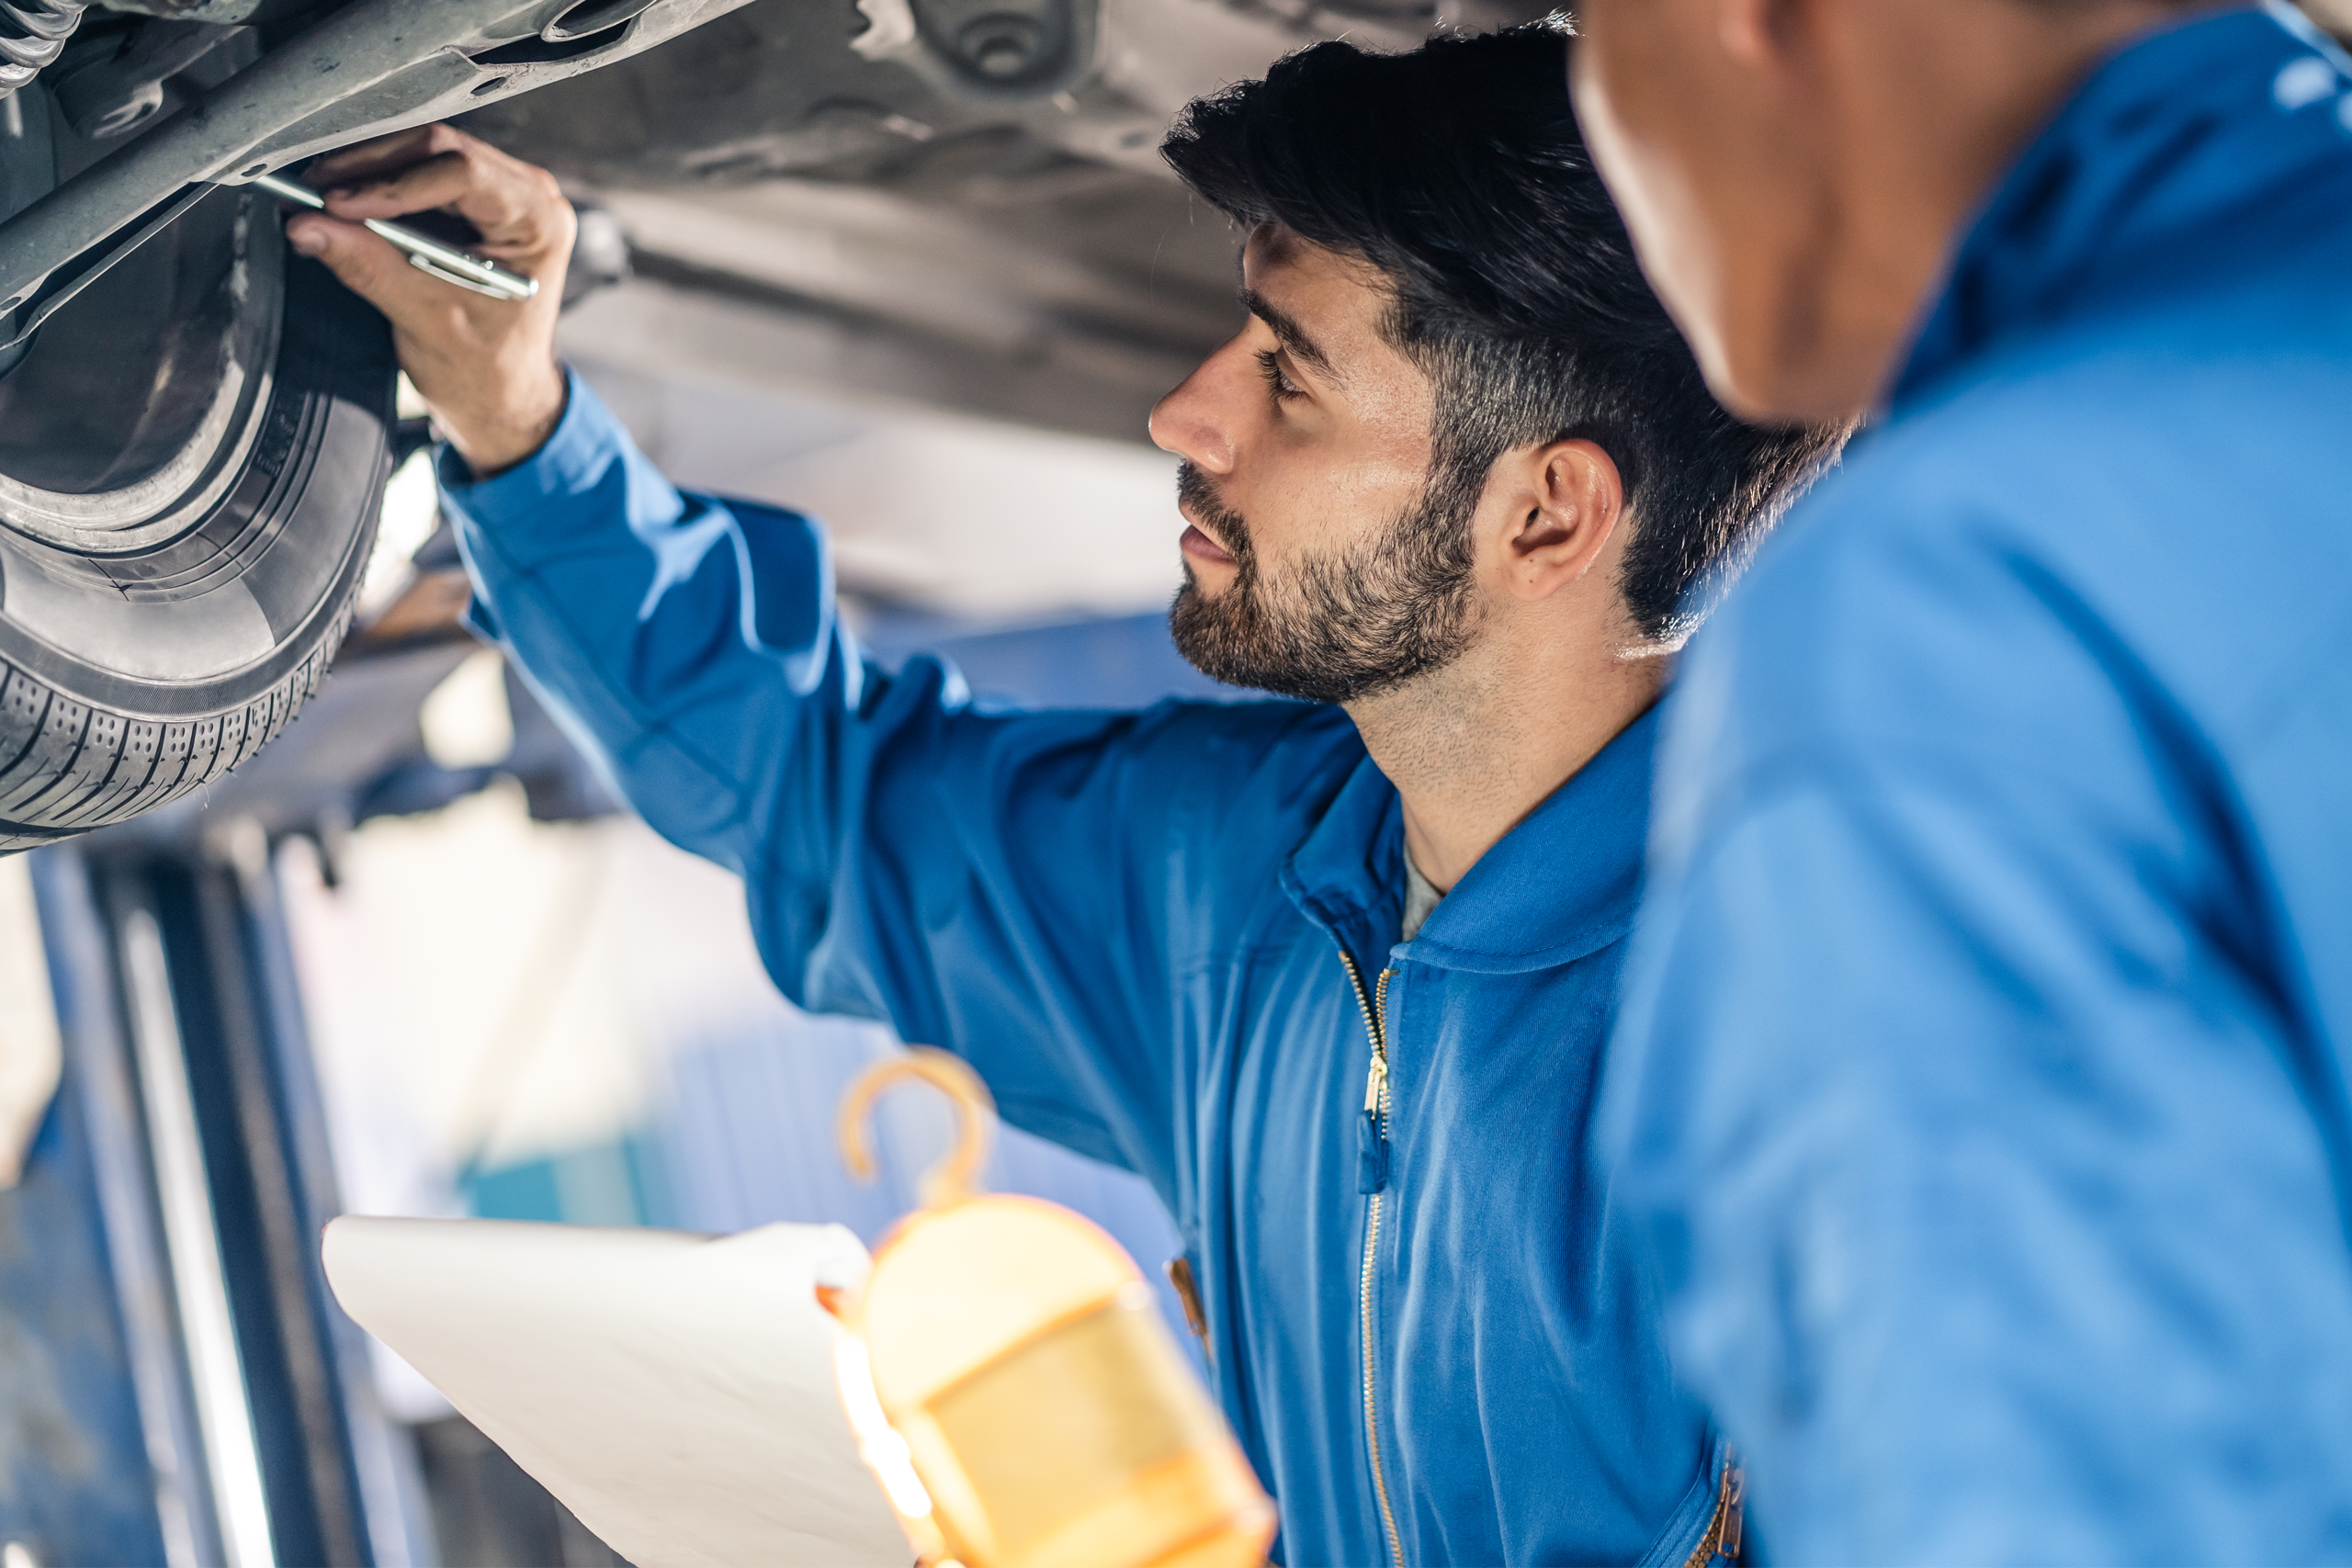 When Should a Car Be Inspected?